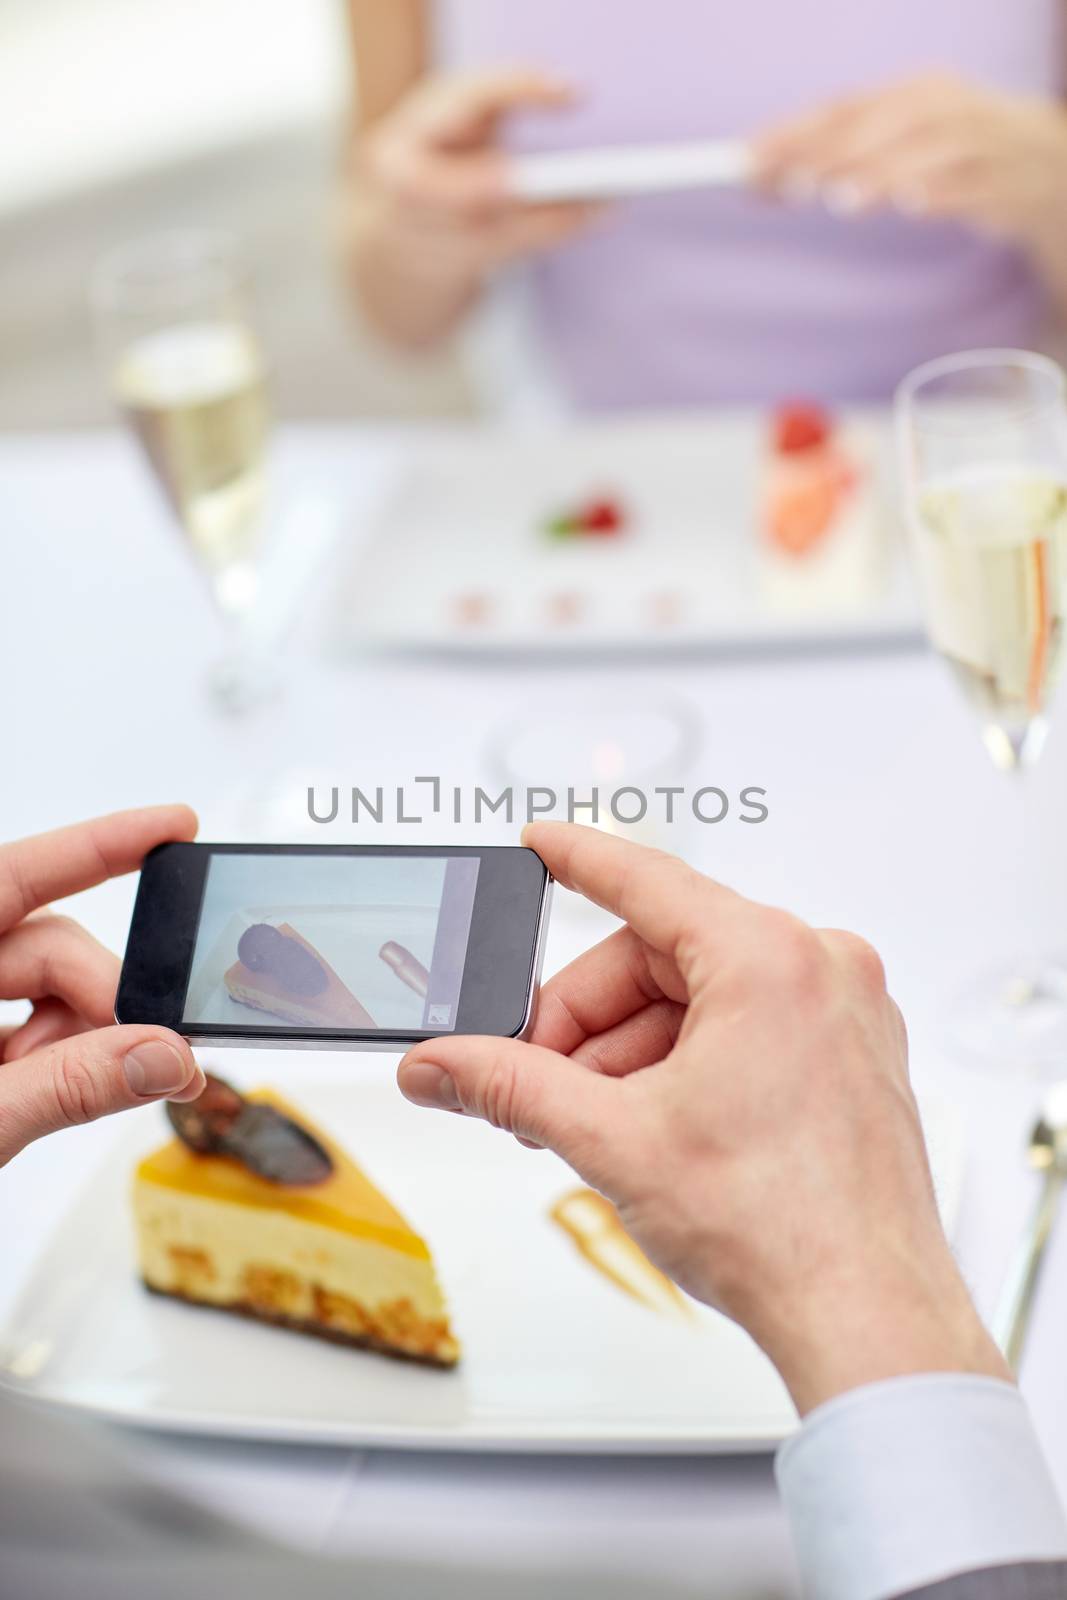 people, leisure, eating and technology concept - close up of couple with smartphones taking picture of food at restaurant